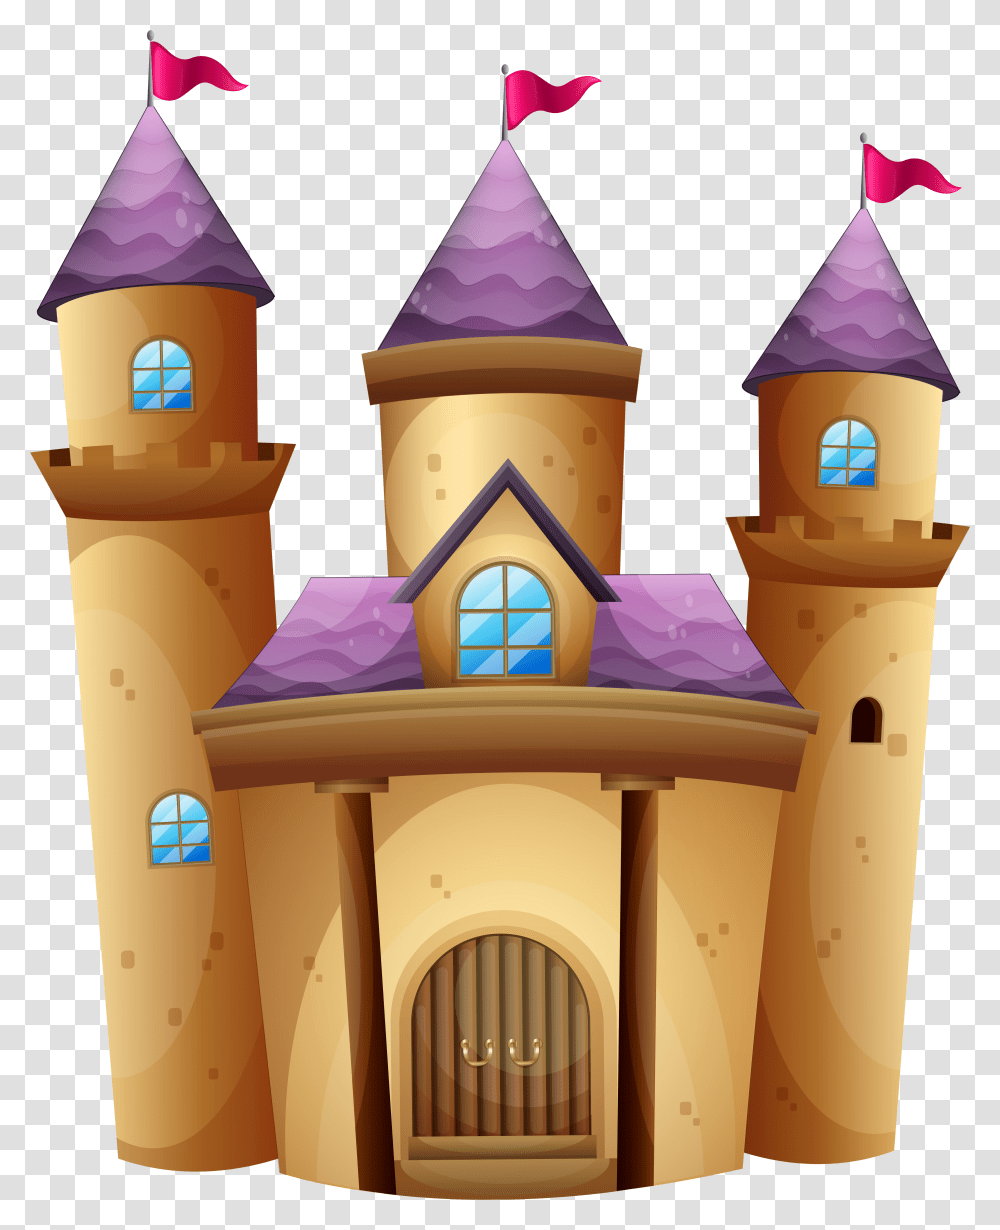 Top 84 Castle Clip Art Prince And Princess With A Castle Cartoon, Crib, Furniture, Architecture, Building Transparent Png